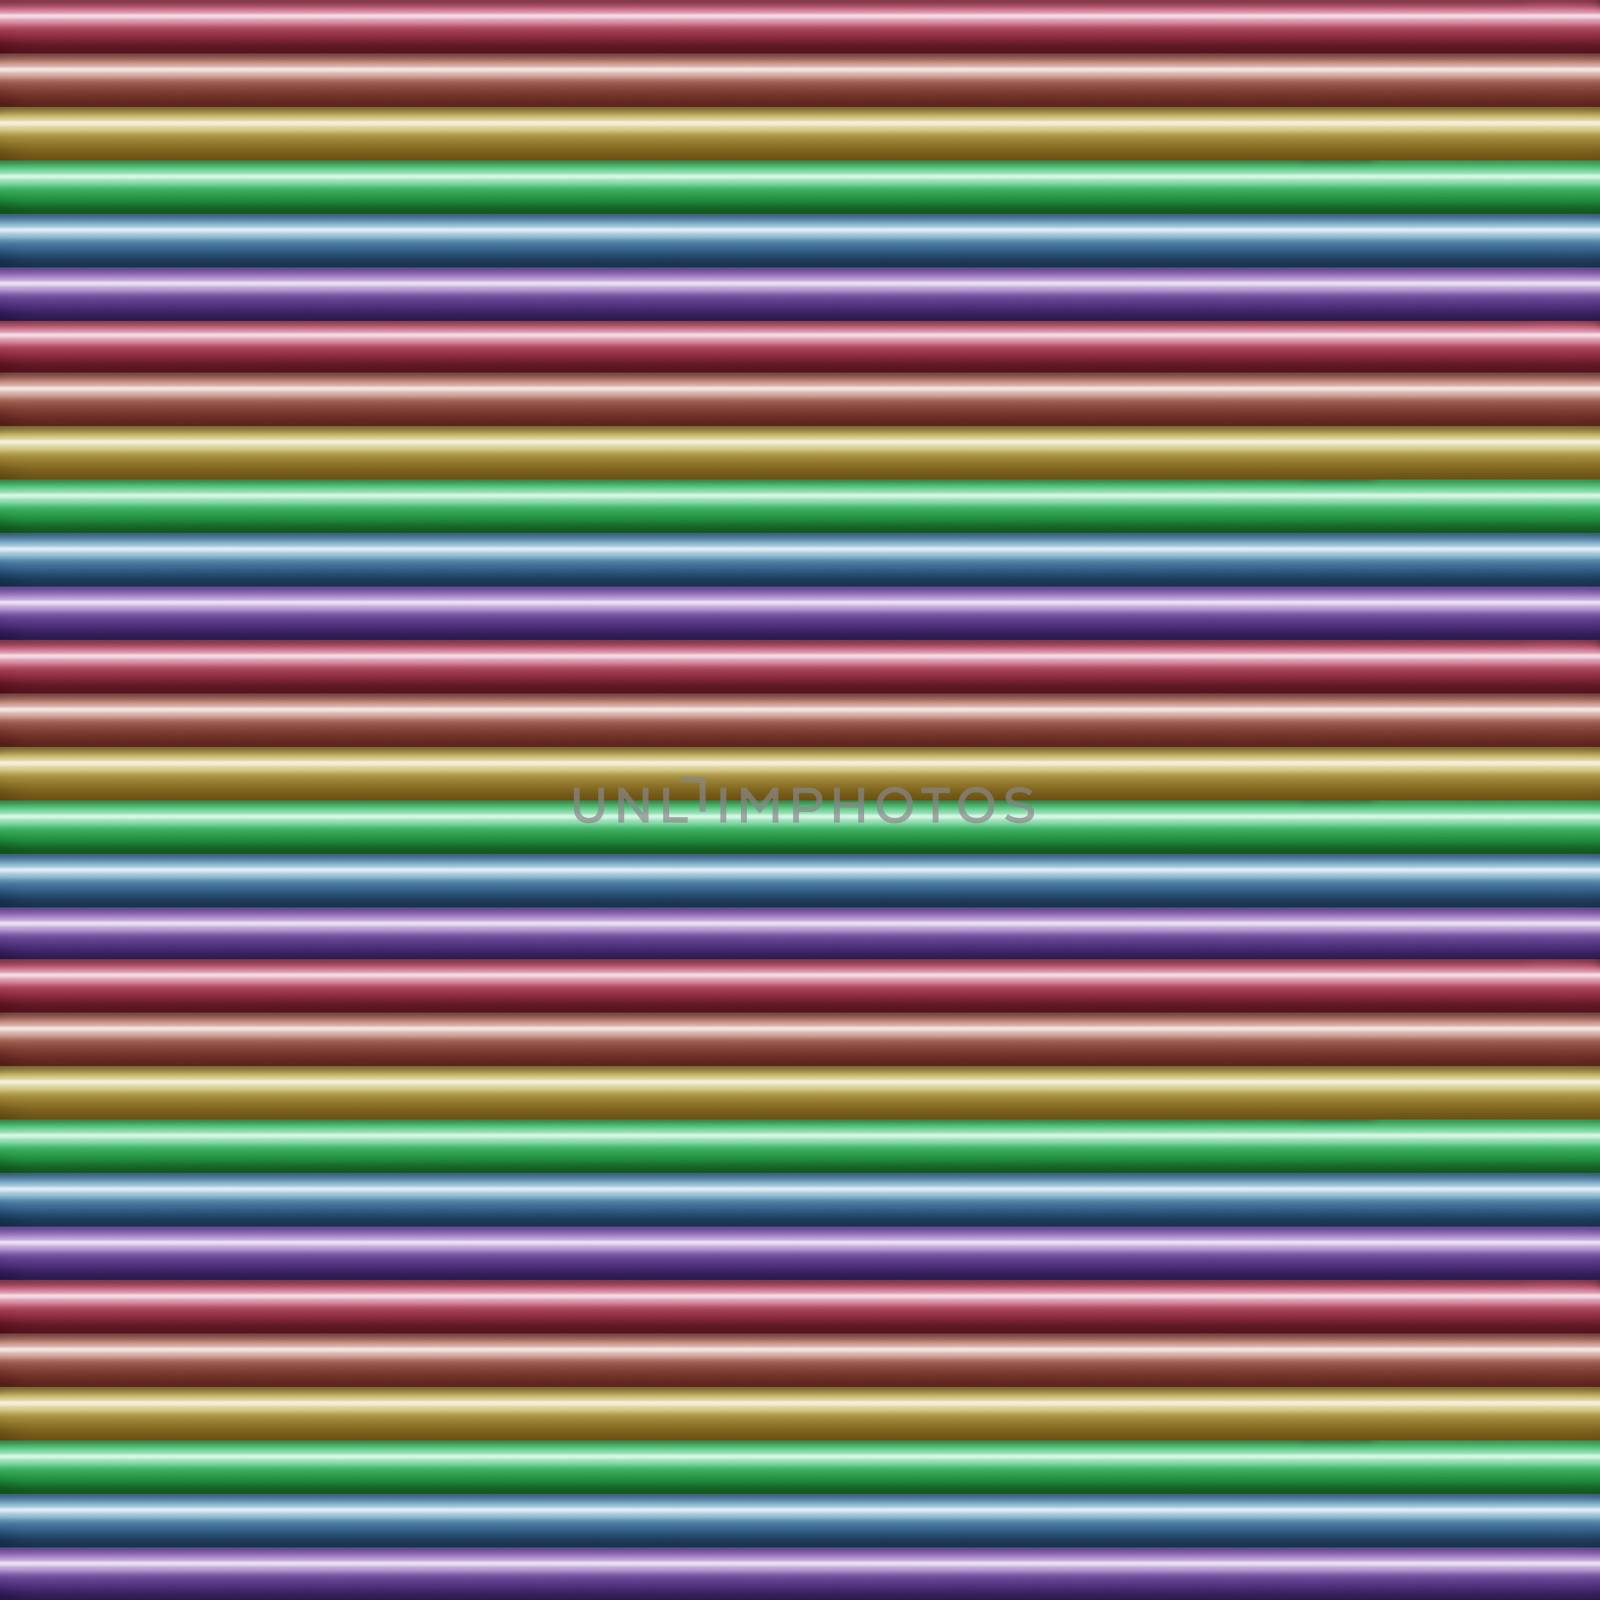 Horizontal multicolored tube background texture seamlessly tileable